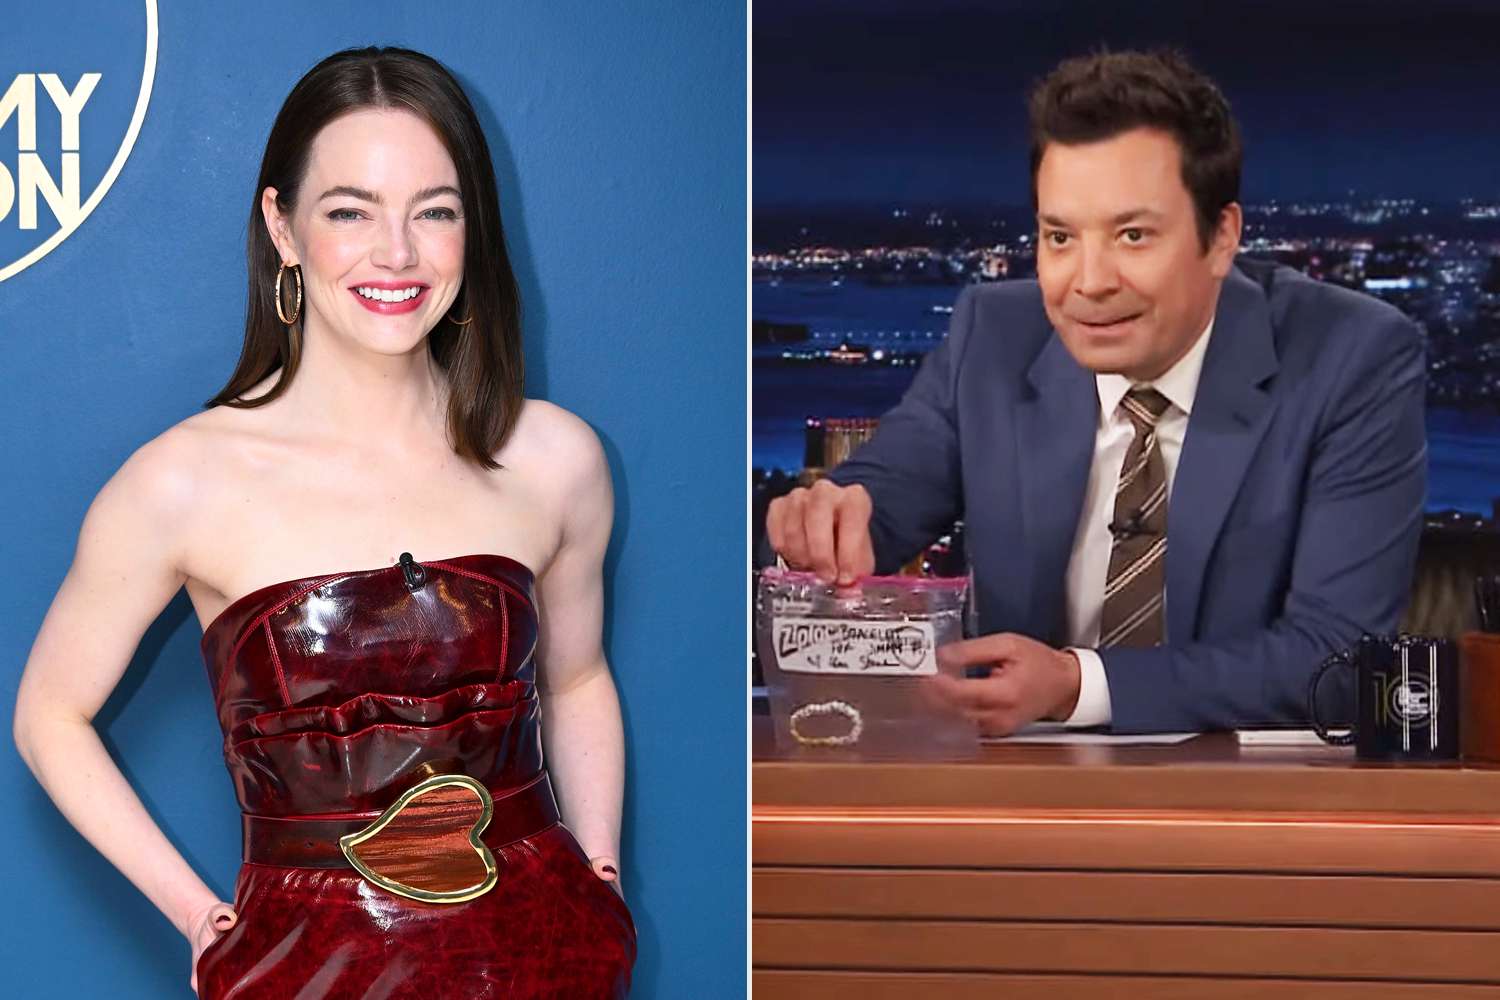 Jimmy Fallon Shows Off Friendship Bracelet Emma Stone Made for Him — with a Hilarious Message on It!